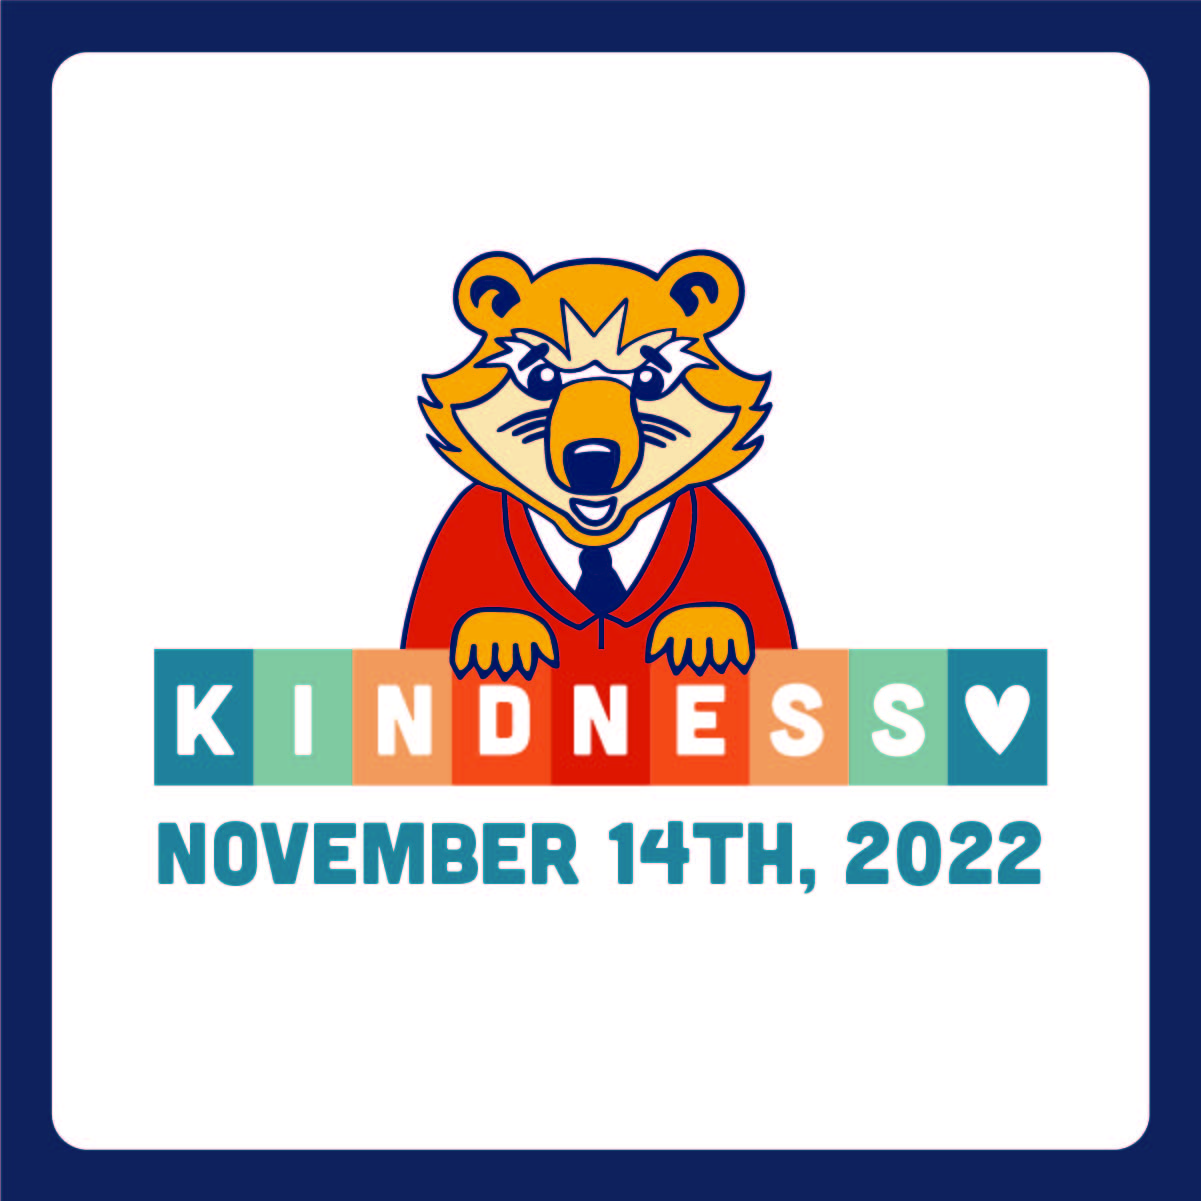 Fred Rogers Institute to host second annual Kindness Campaign